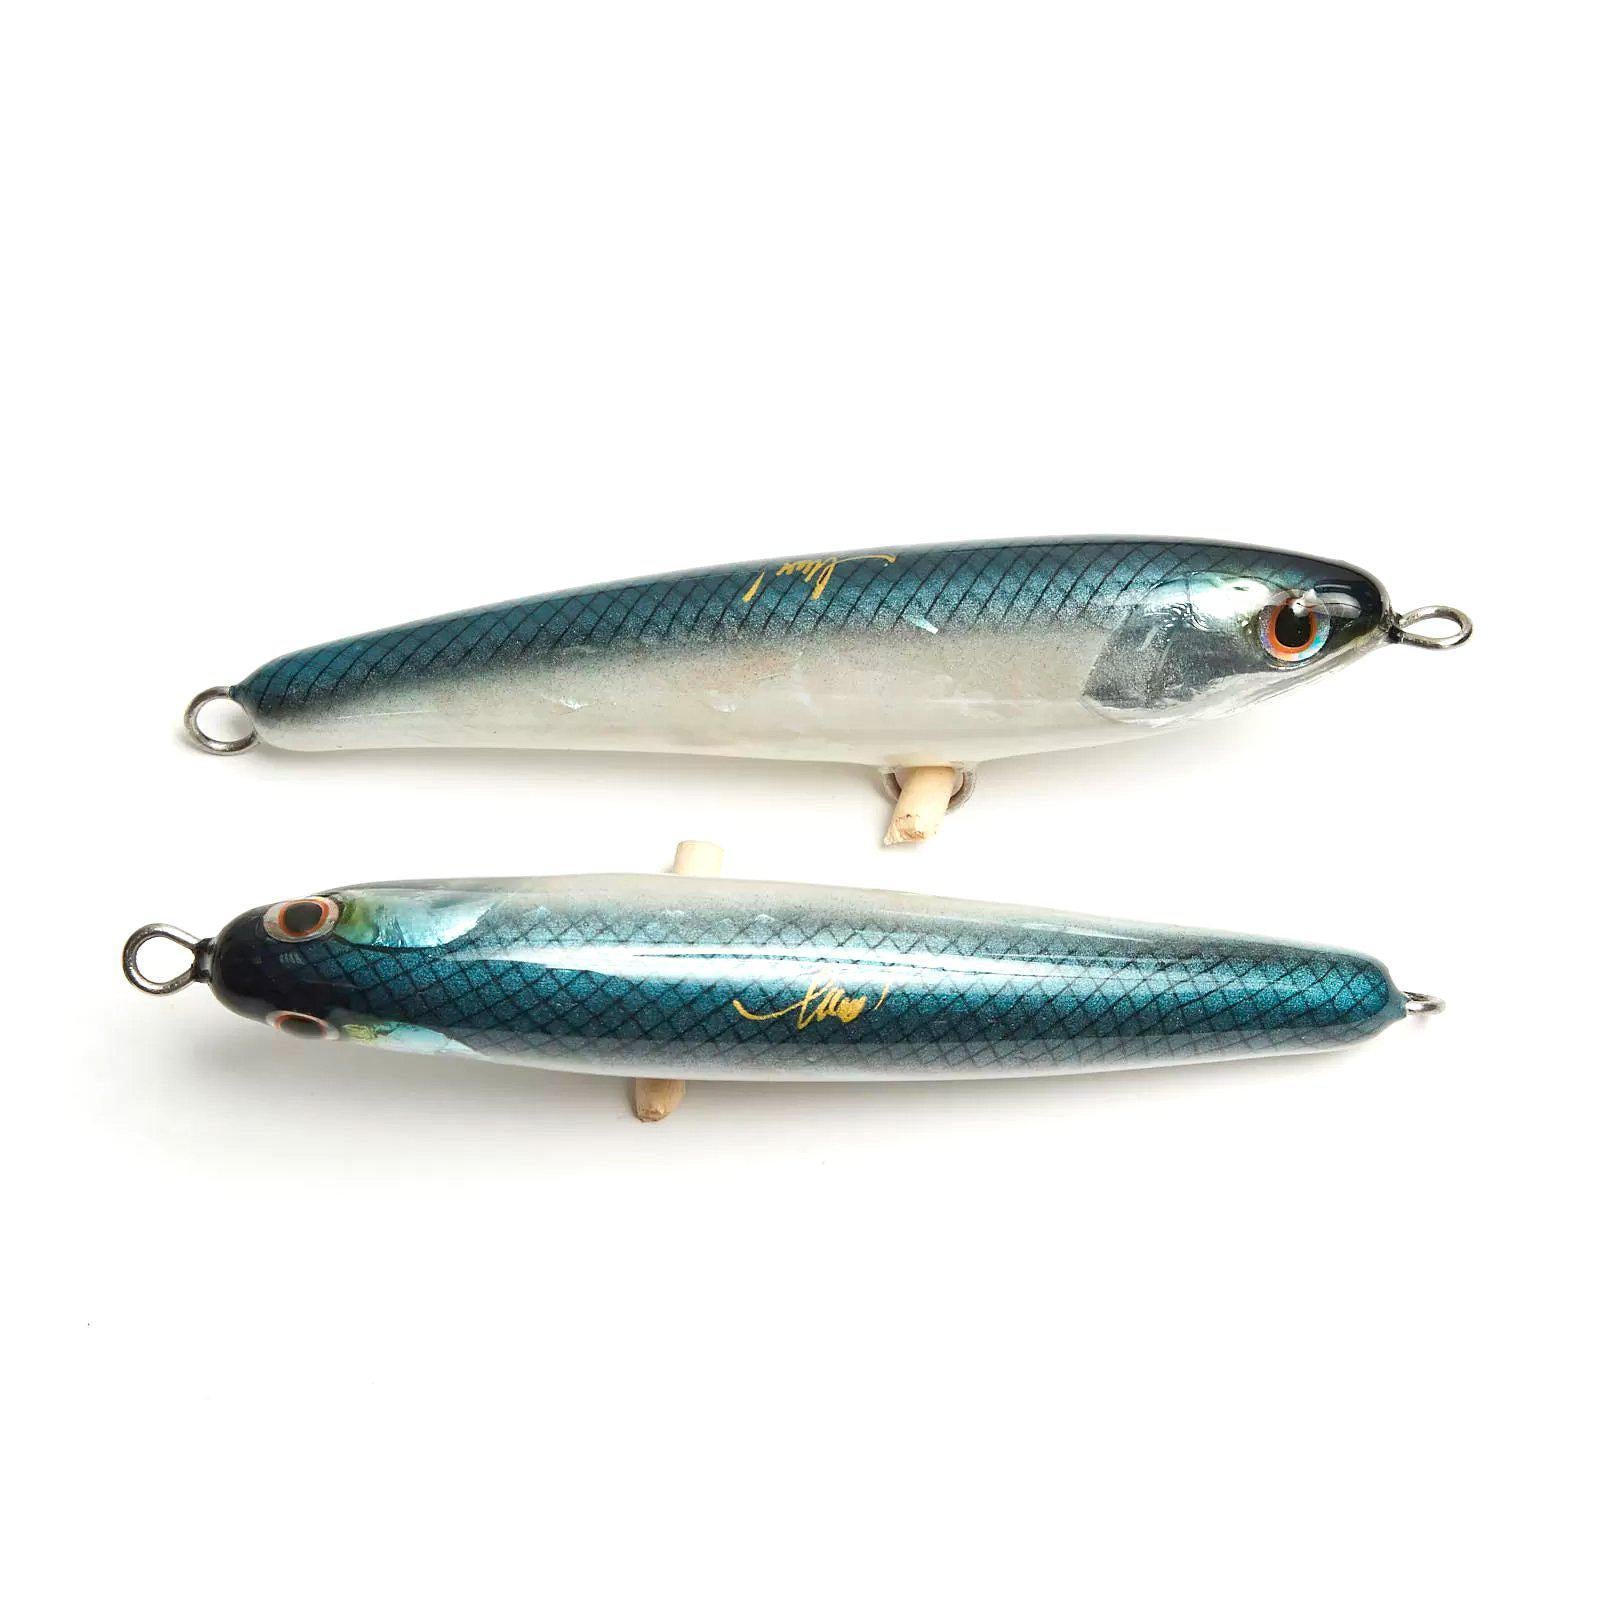 Sinking Stickbait Lure Fishing Pencil Lure 7g/20g, 45% OFF